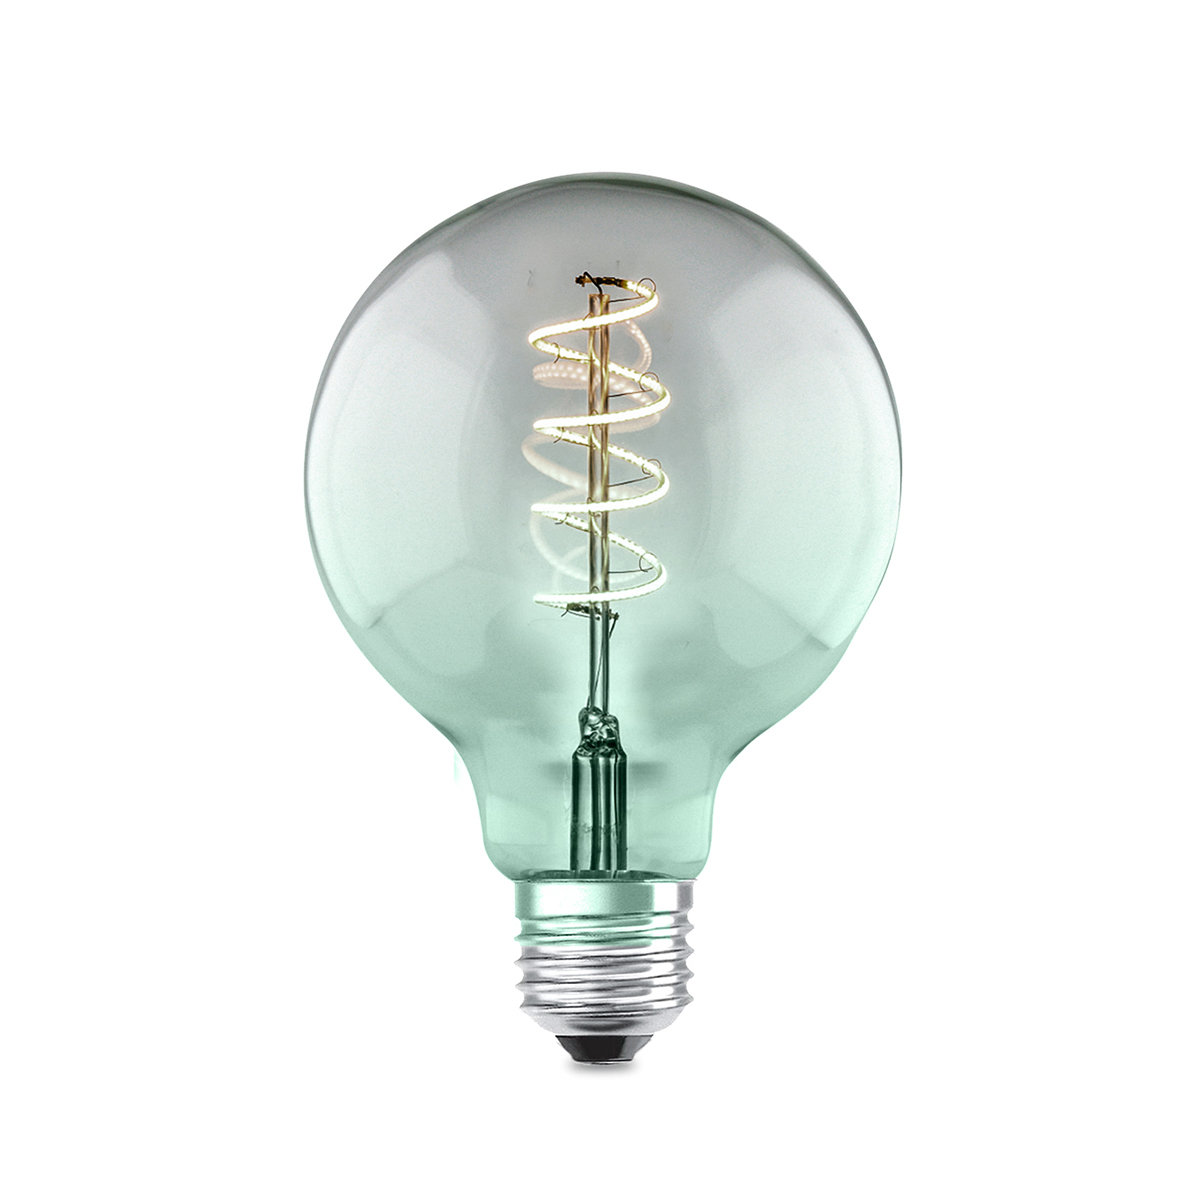 Tangla lighting - TLB-9005-04A - LED Light Bulb Single Spiral filament - G95 4W gradient color bulb - green - non dimmable - E27